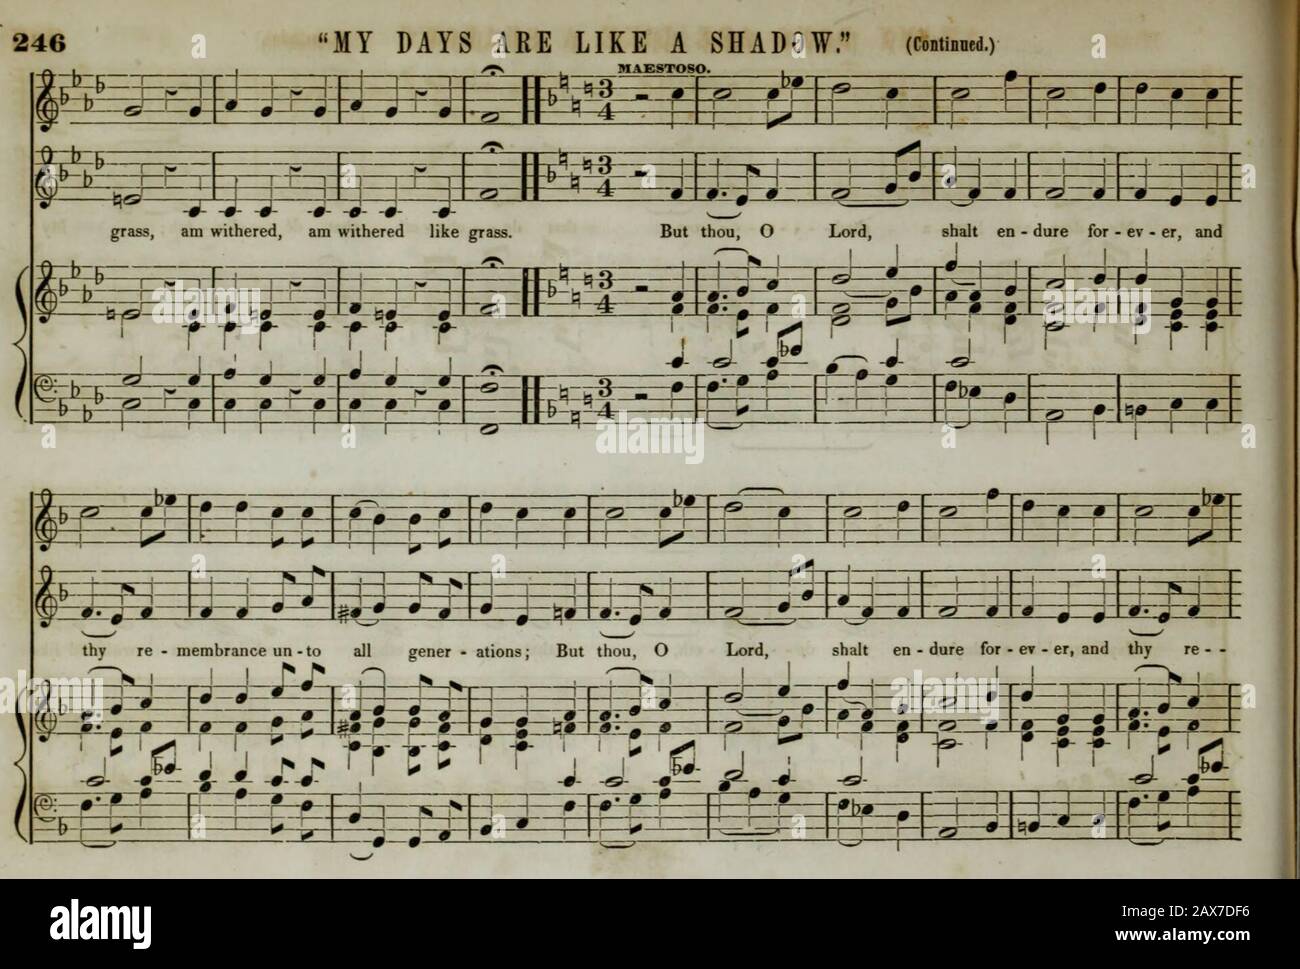 The Boston Musical Education Society's collection of church music : consisting of original psalm and hymn tunes, select pieces, chants, &c.; including compositions adapted to the service of the Protestant Episcopal Church . MY DAYS ARE LIKE A SHADOW, (Continued.) 245 [W v j i i L# I 1 | E  B^Ffa^H^ i. i r 1 f—i i S? ST— I— r My days are like a I ! I* I* that de - - clin - eth, that de - • ... .j (   . clin - eth; i i i My V f—p—p—p— 1 ! i J J i—& —1 -fS&gt;— p p t&gt; i -1—r—]—1— f-f-rl i i 1 1 1 1—1 h- i——n -1=F ST— S?— -?—F-p- 1 days are like a shadow 1 1that de - - -f-i—f- clin - - eth, Stock Photo